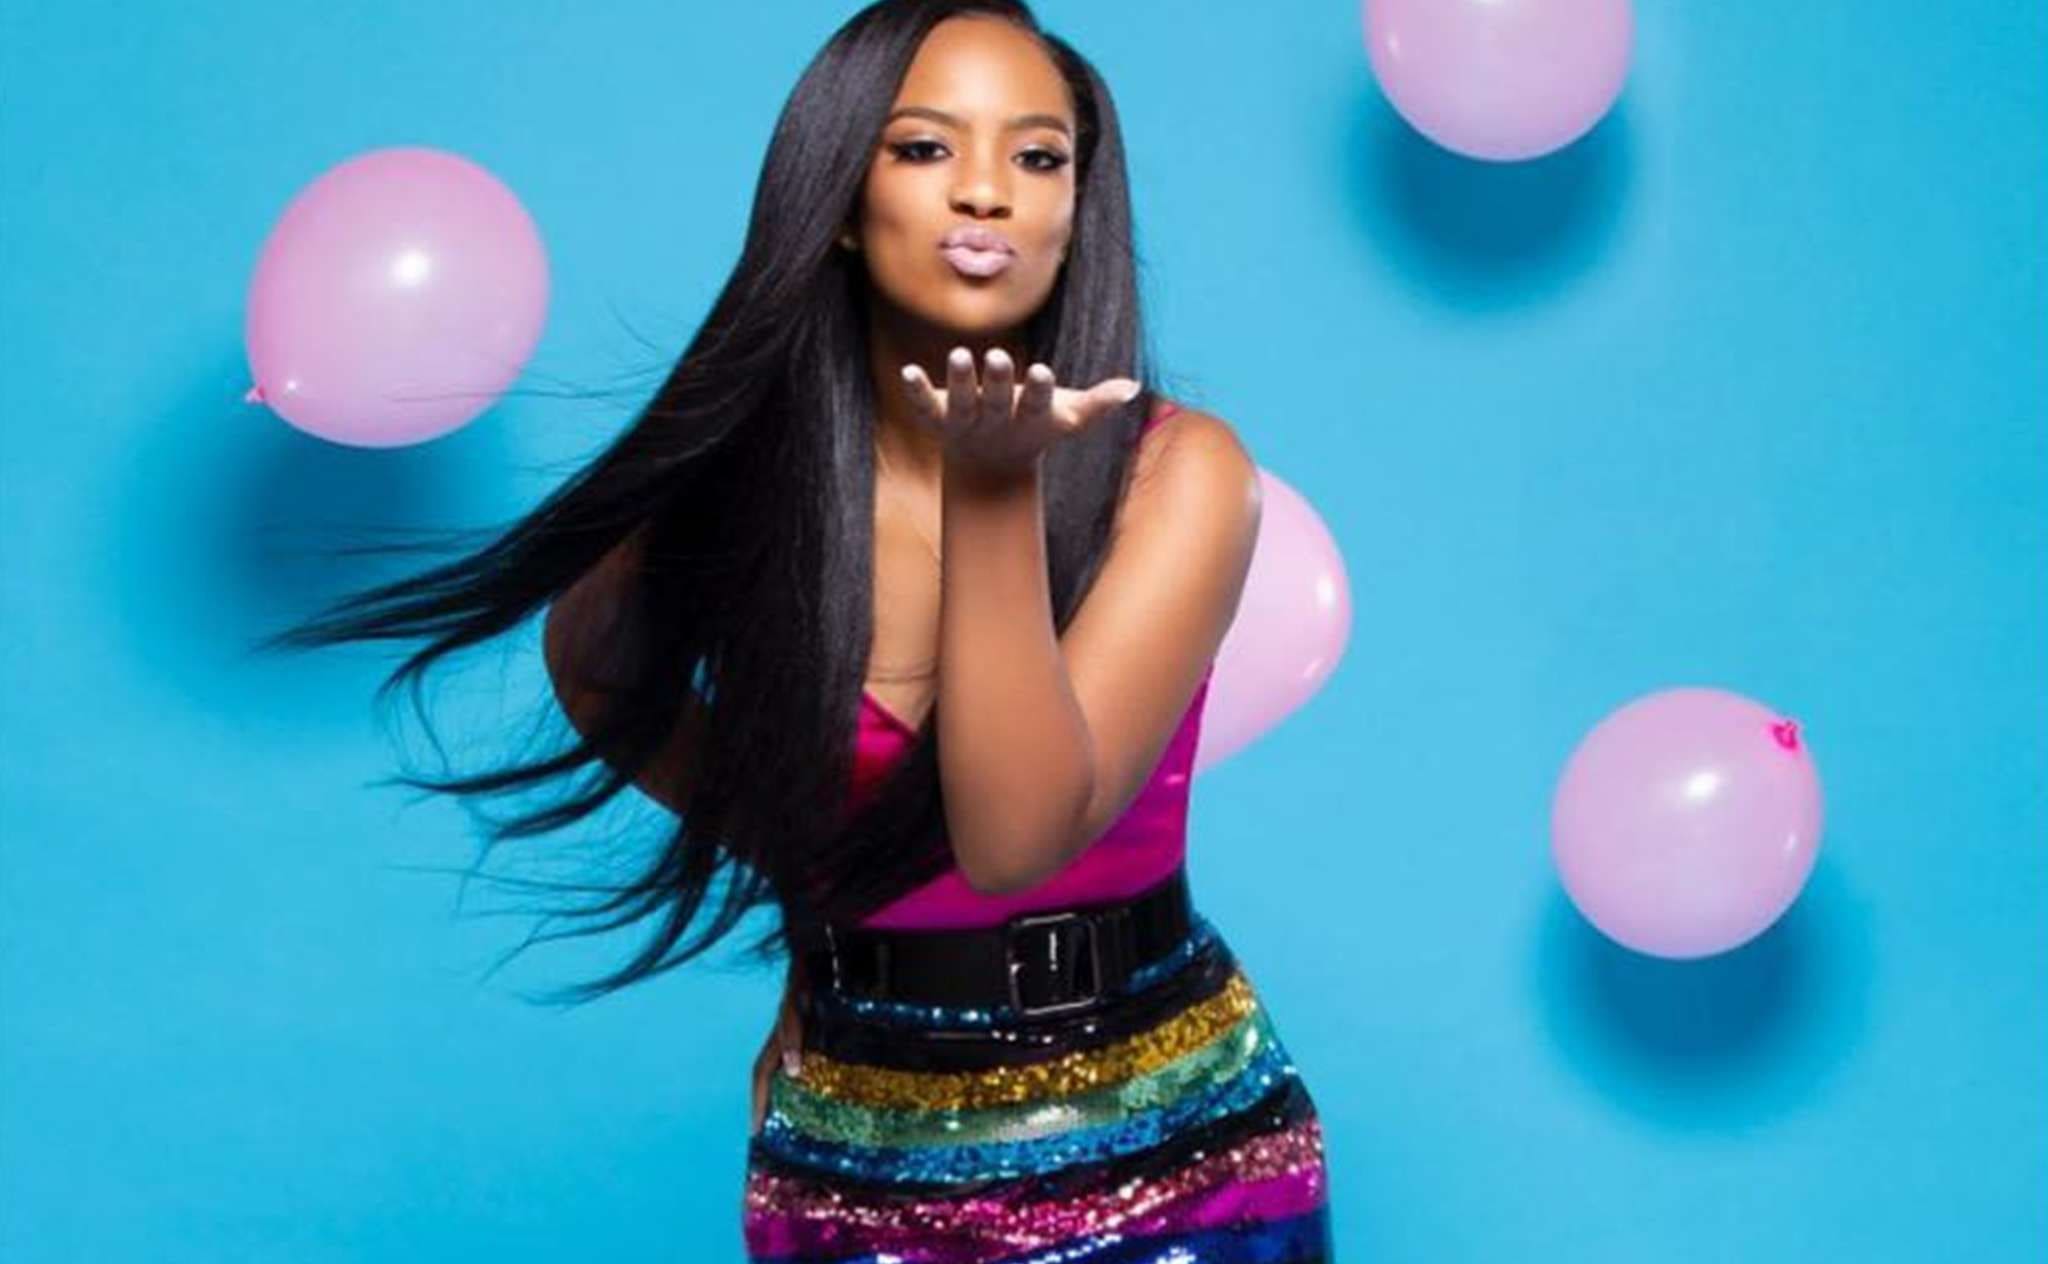 Kandi Burruss' Daughter Riley Burruss Updates Fans On Her Very First Week In NYC For Her Internship - See The Video